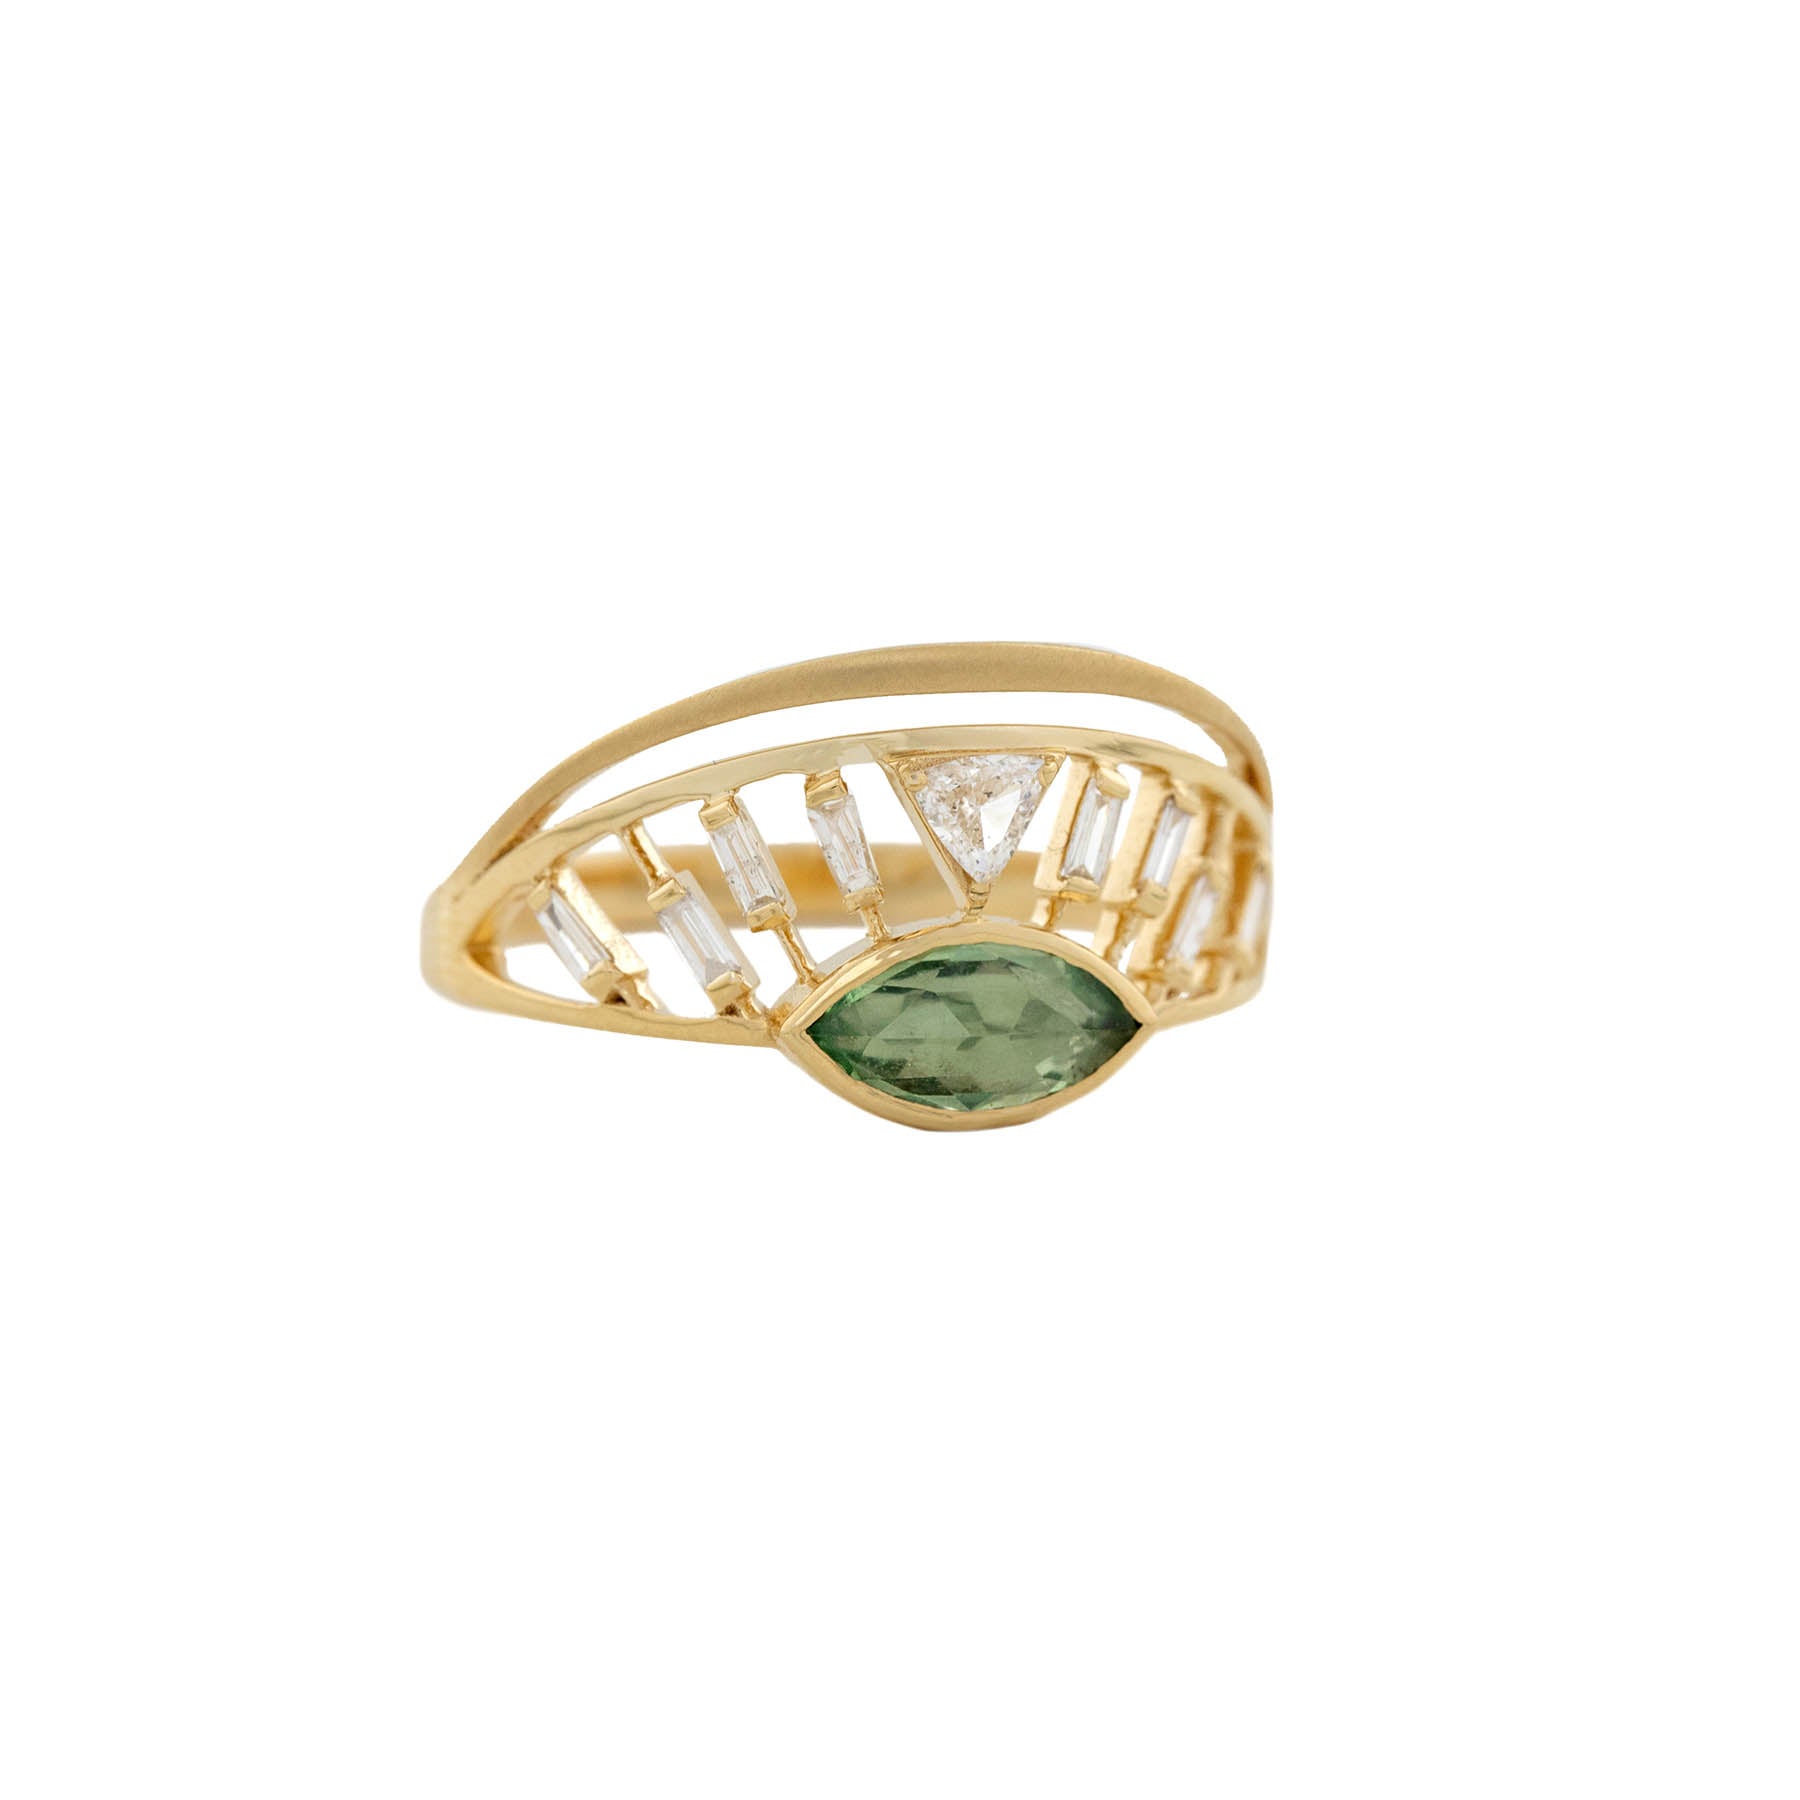 One of a Kind Tourmaline and Diamond Open Eye Crown Ring